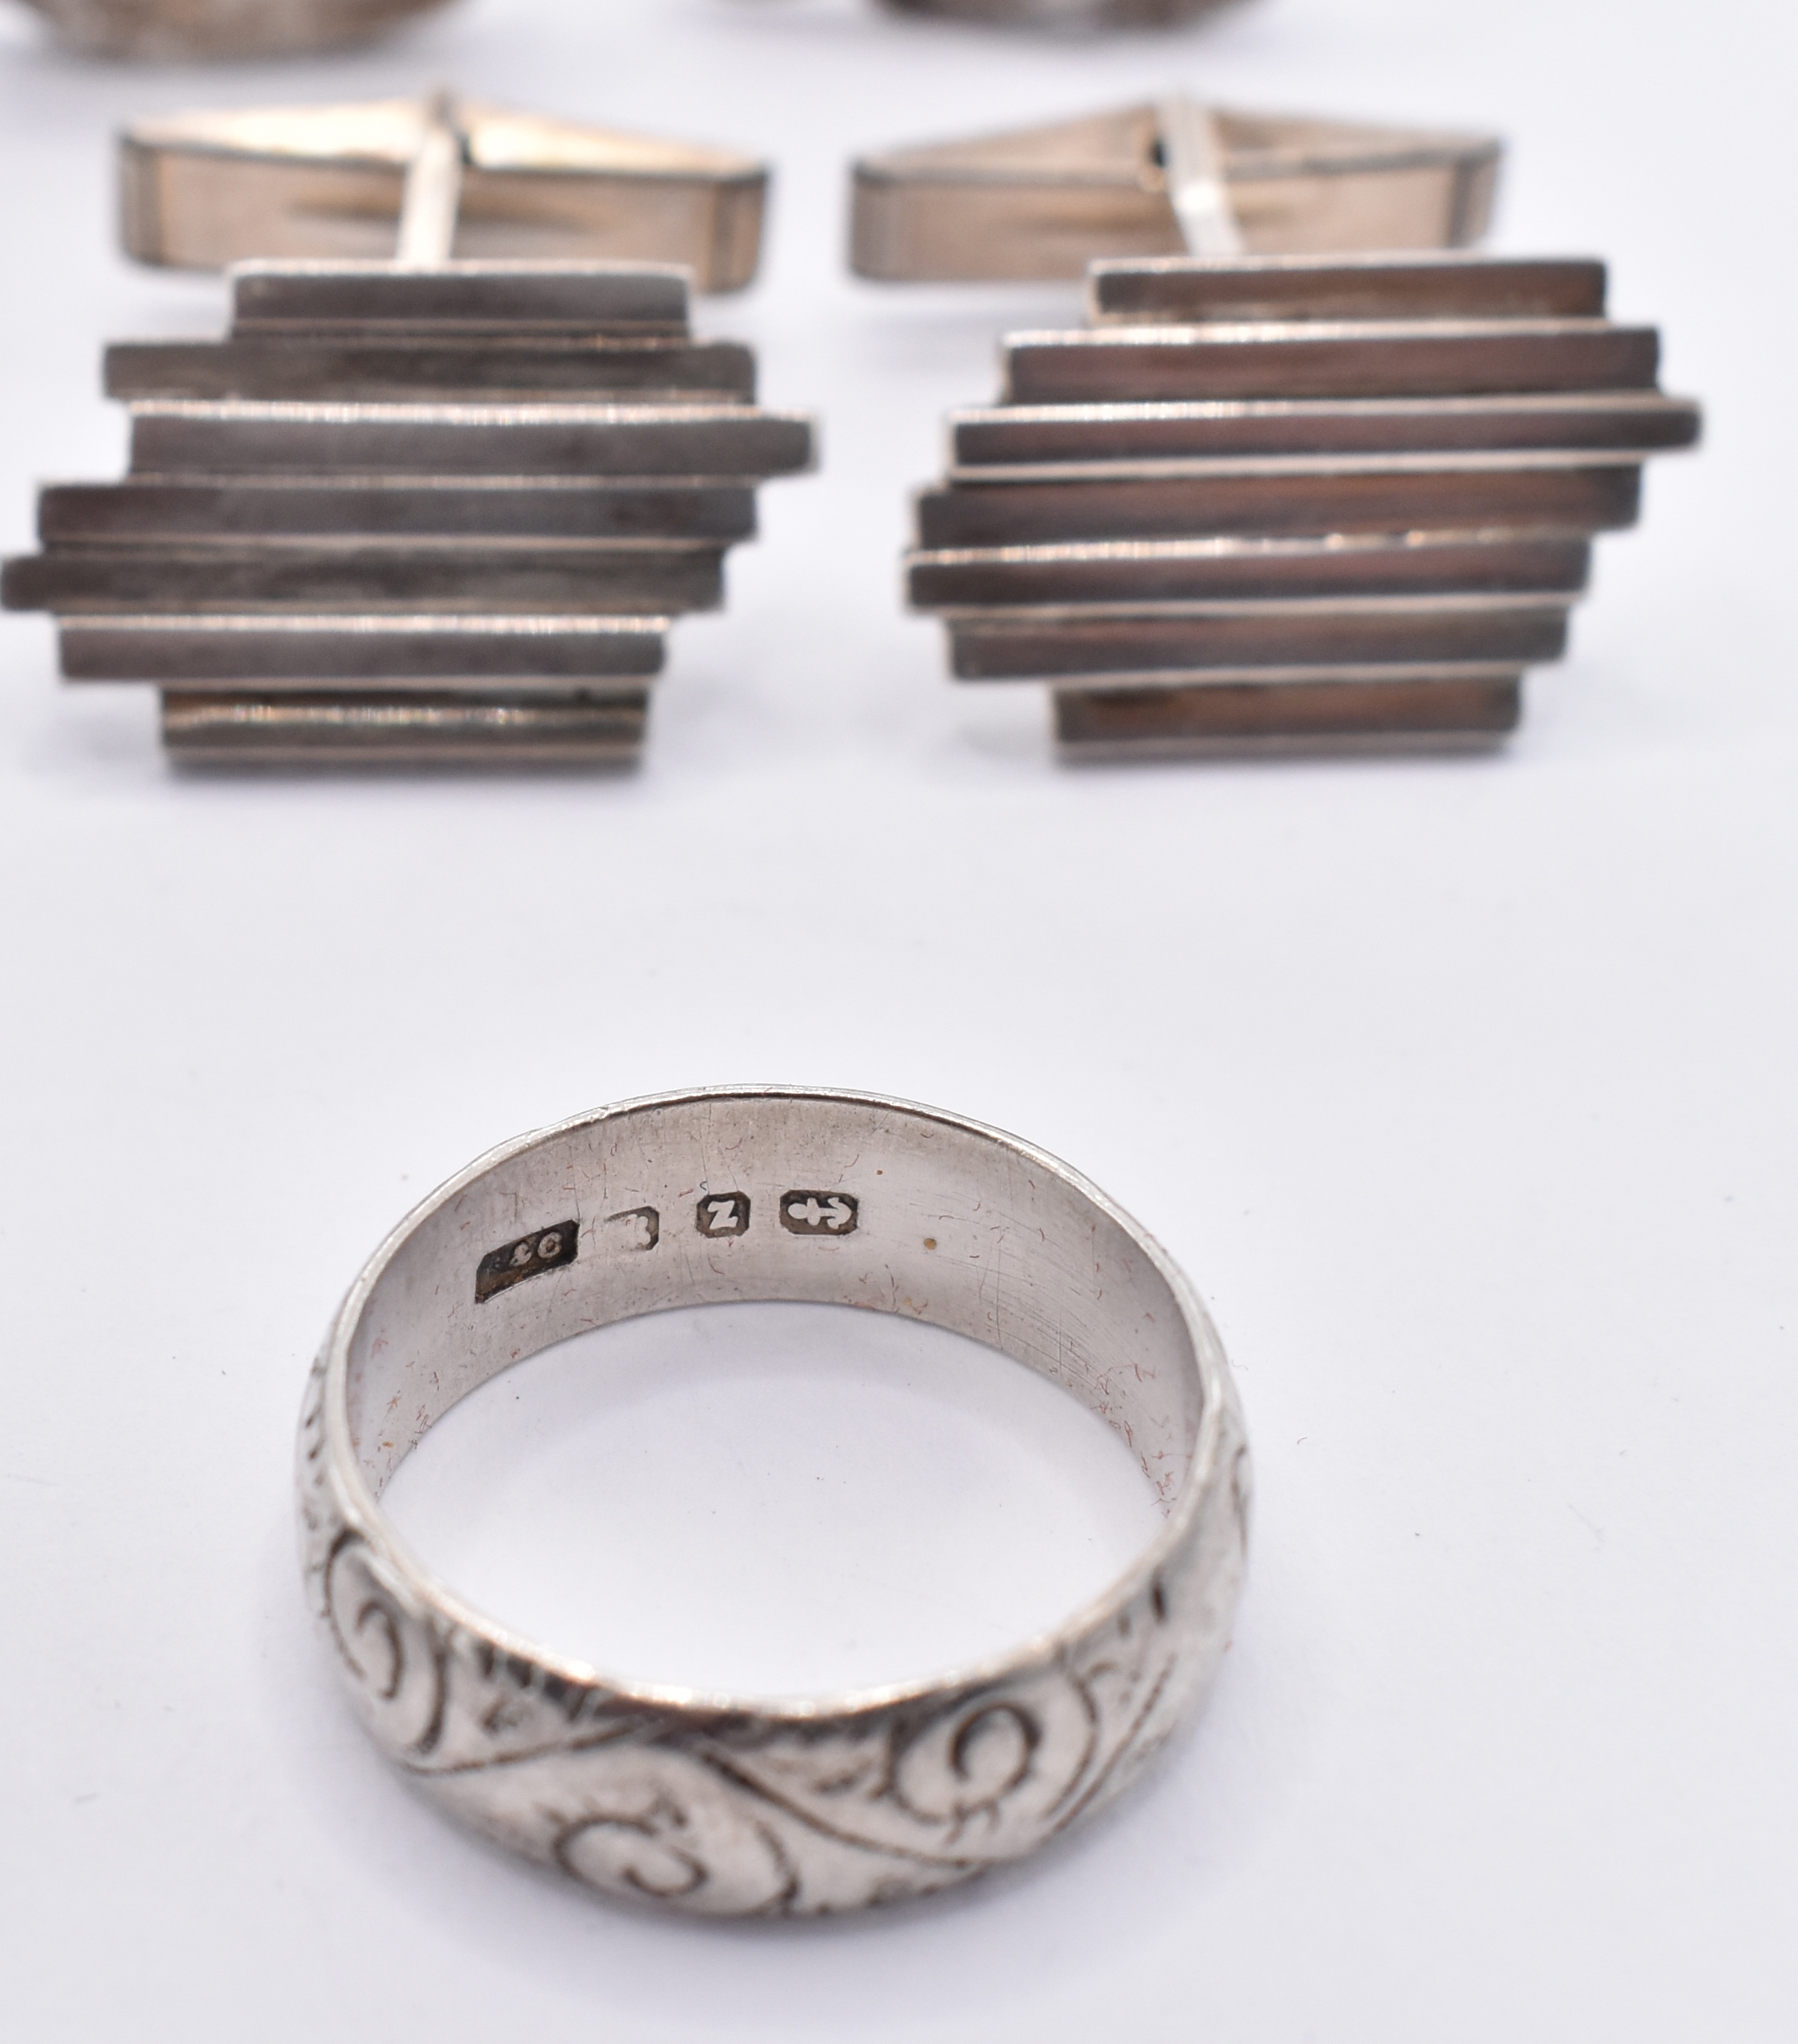 GROUP OF MIXED SILVER STUDIO ART JEWELLERY - Image 5 of 5